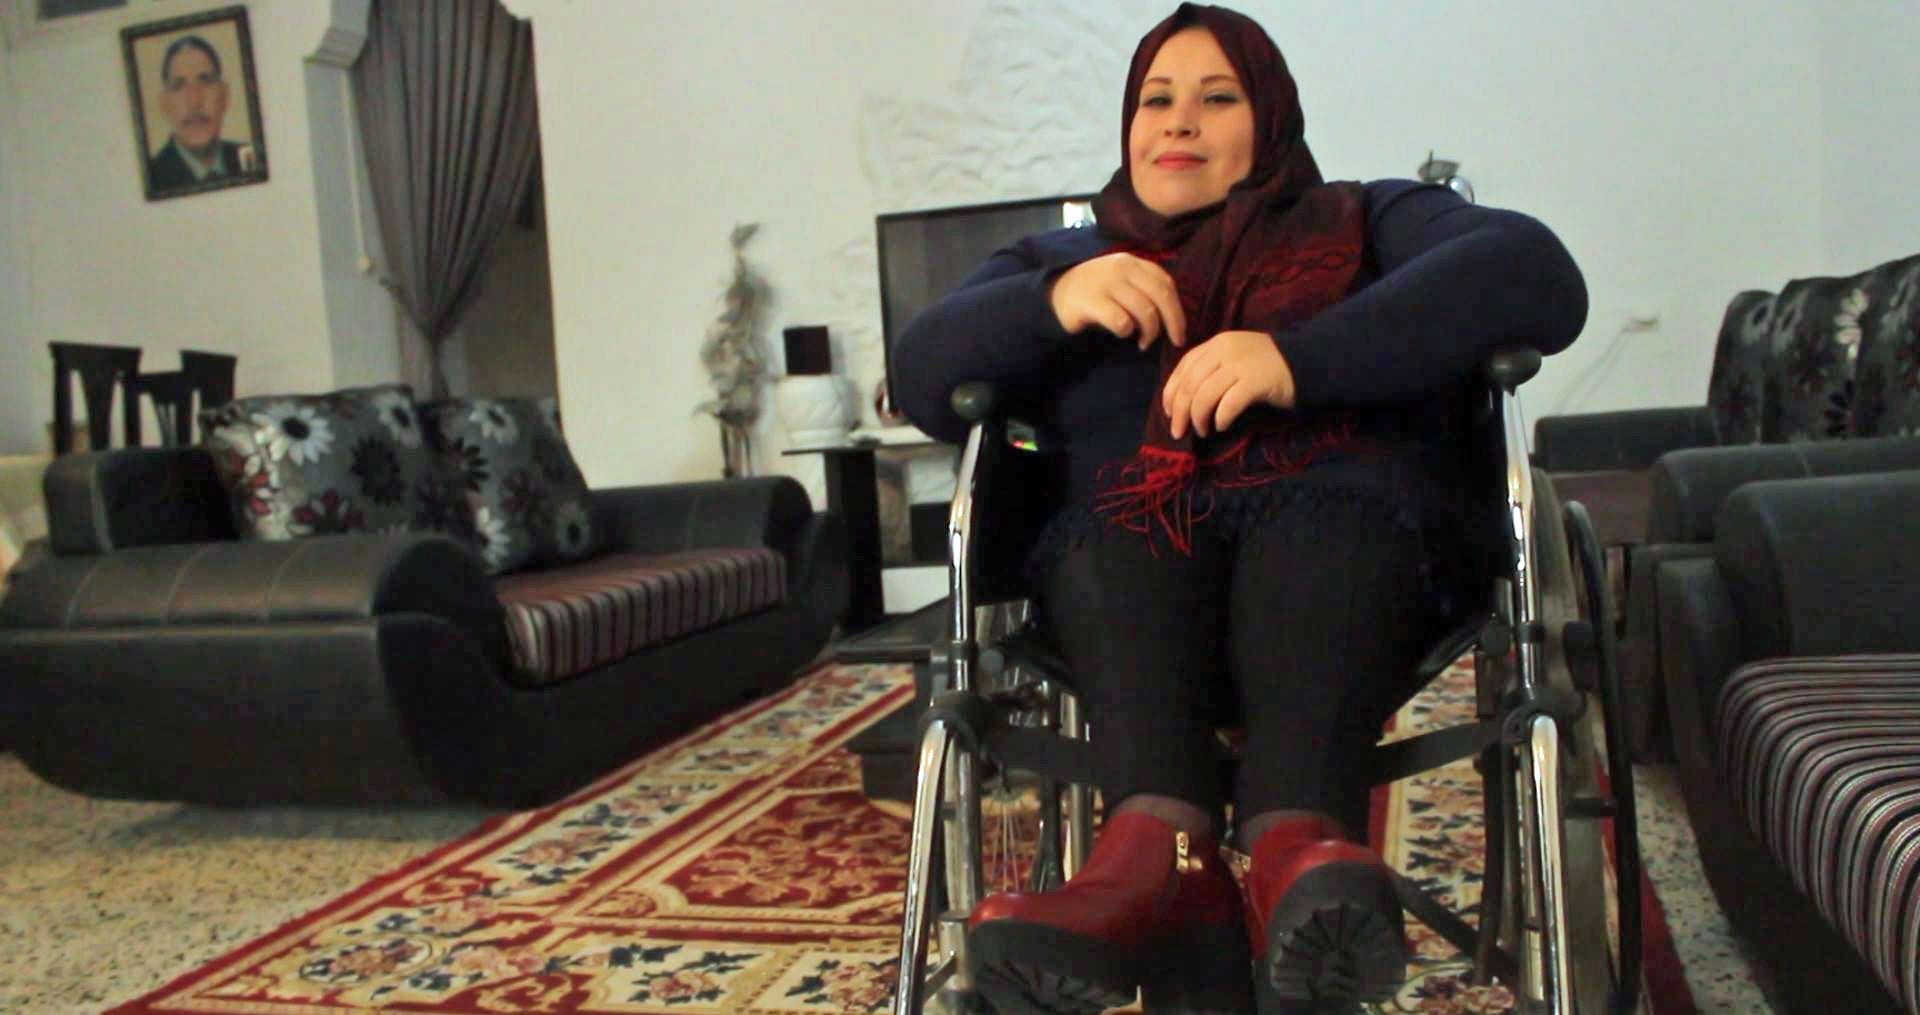 Workers With Disabilities Speak Out in Tunisian Documentary